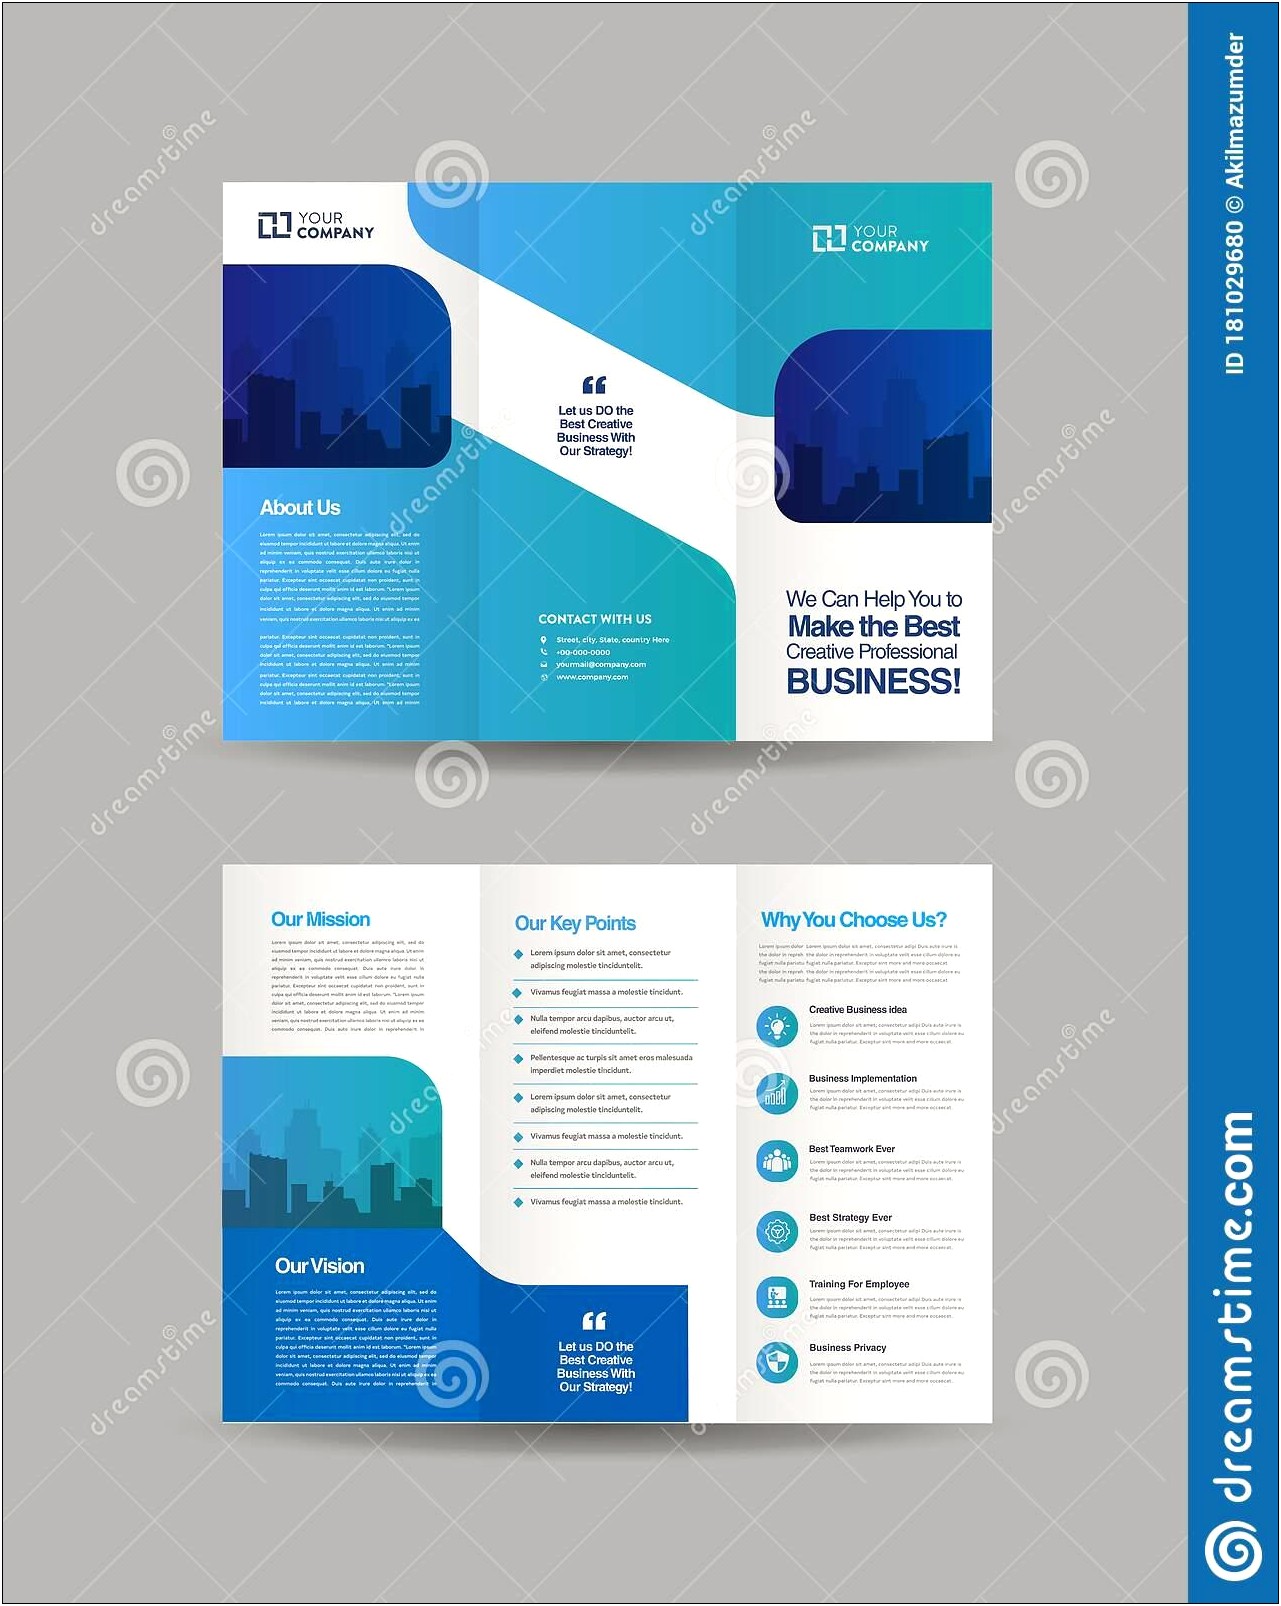 Create Your Own Brochure Templates Free